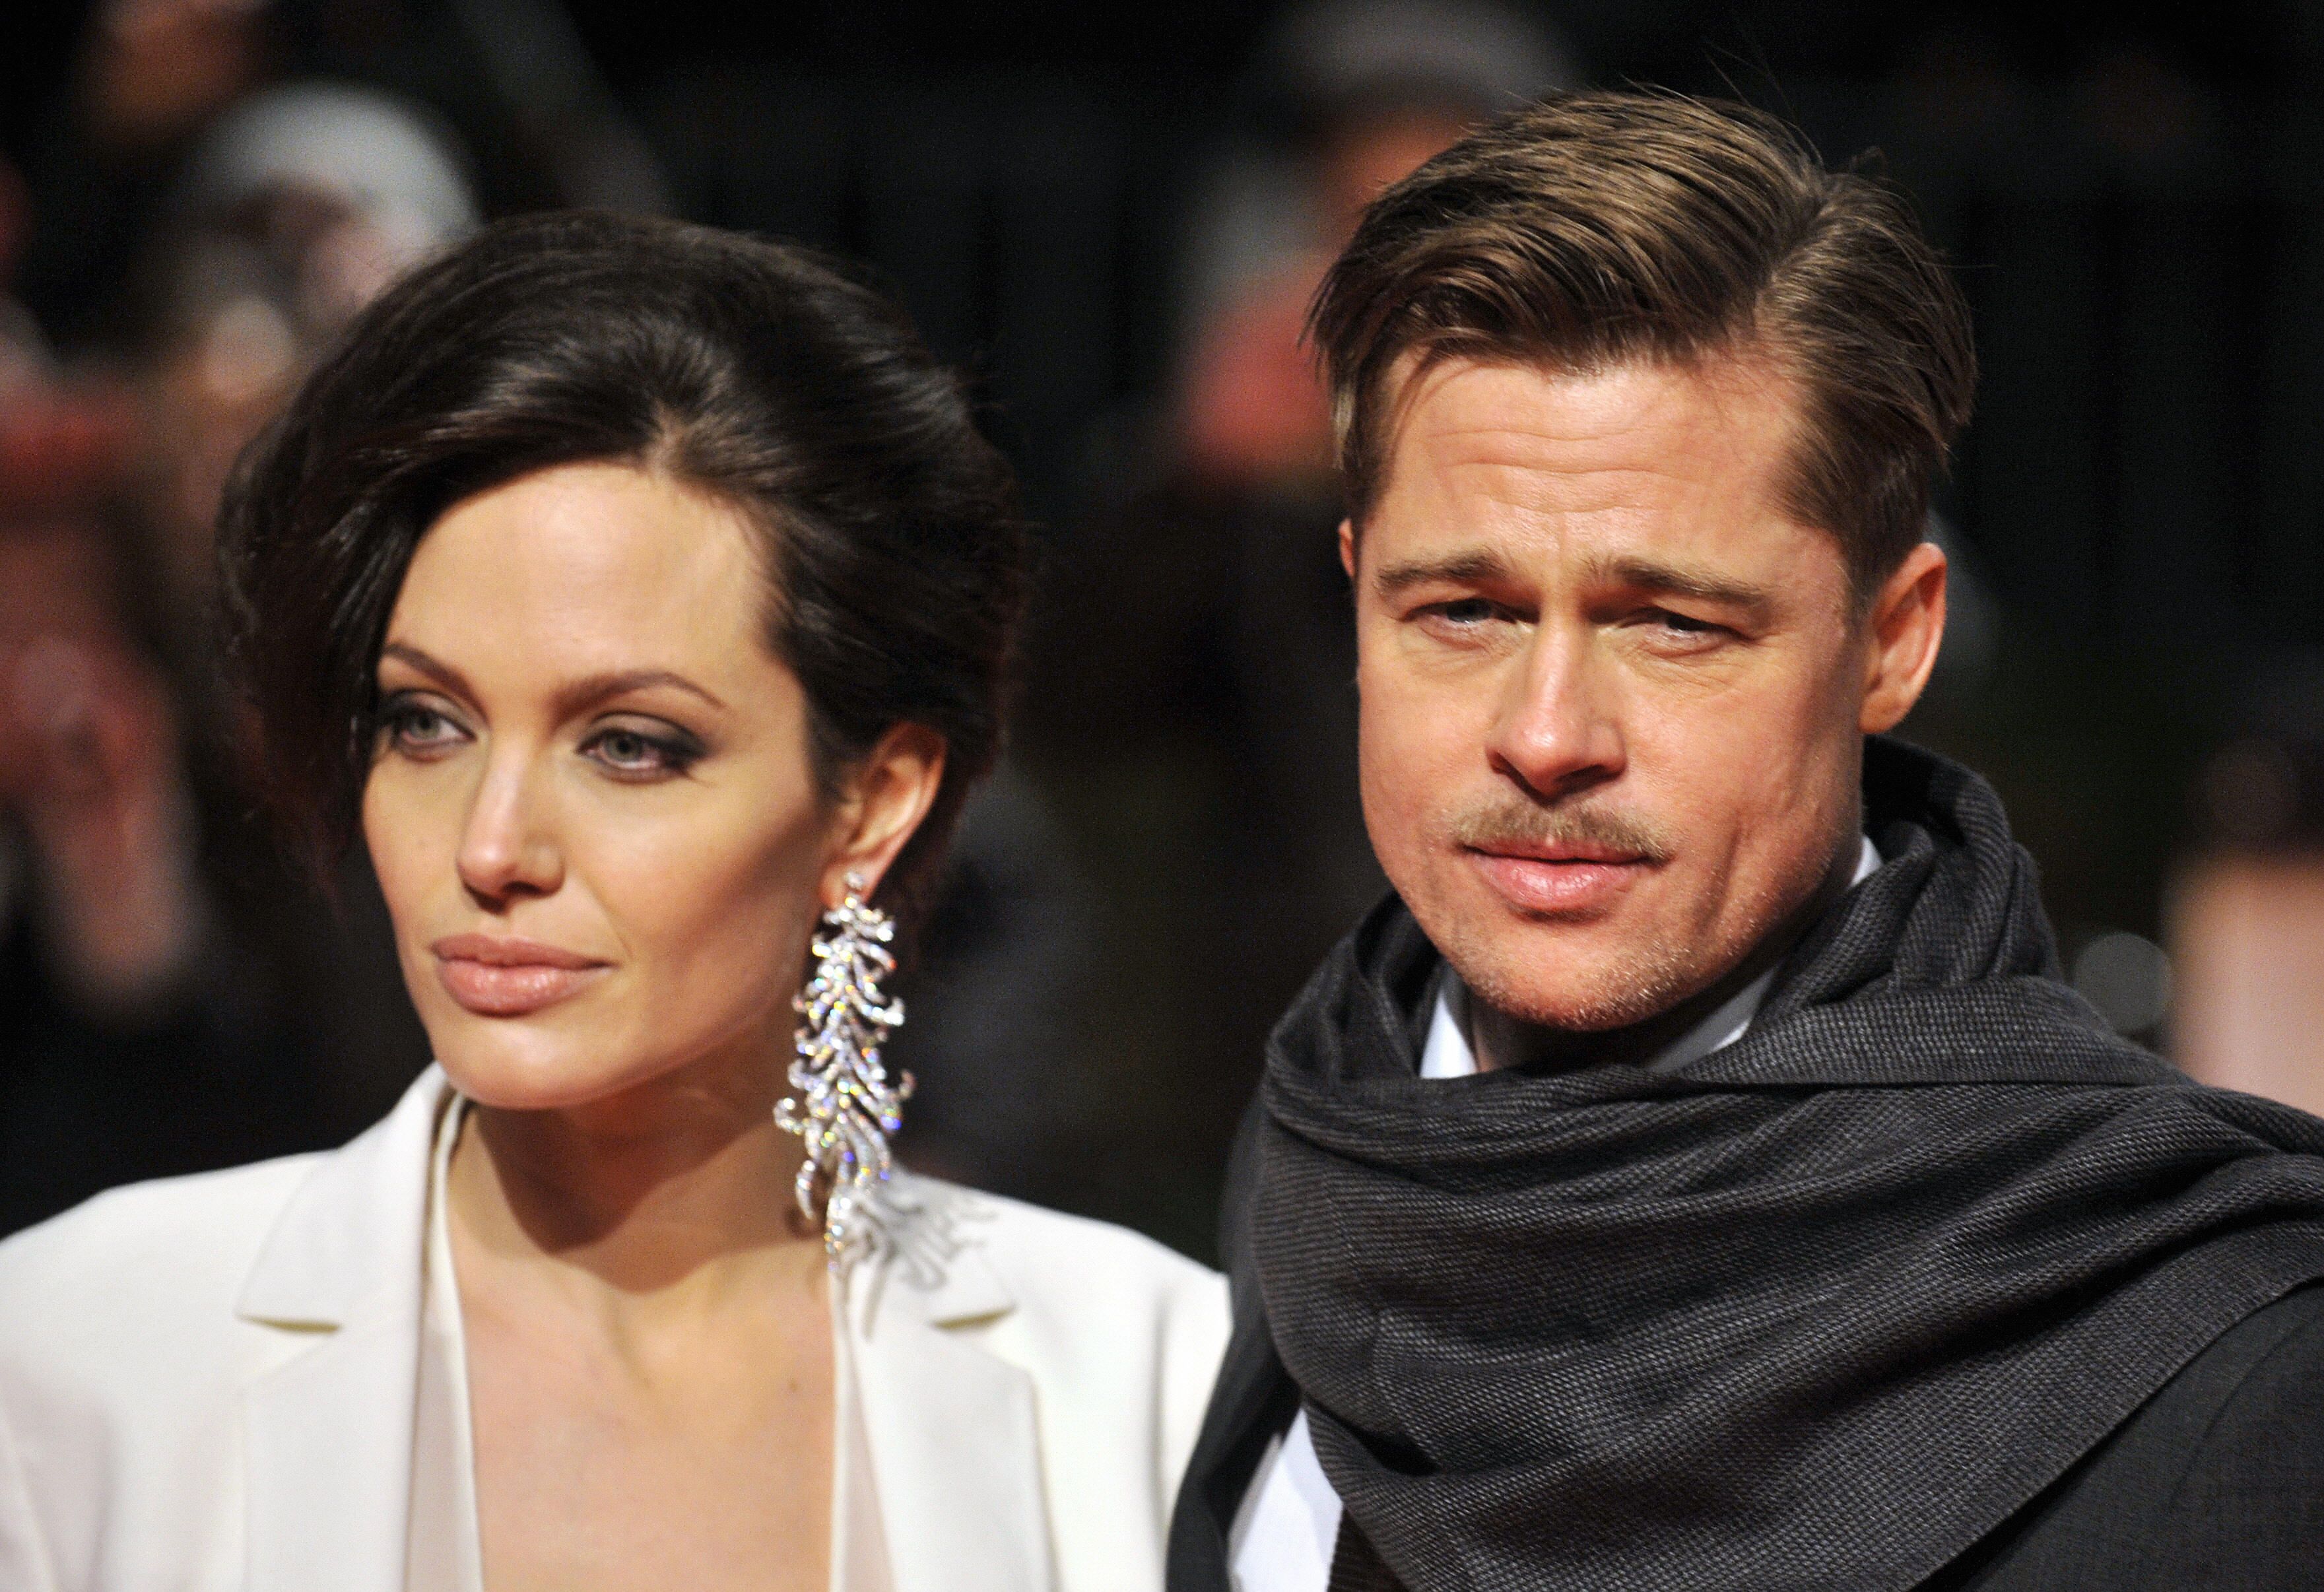 actors brad pitt and angelina jolie pose on the red carpet news photo